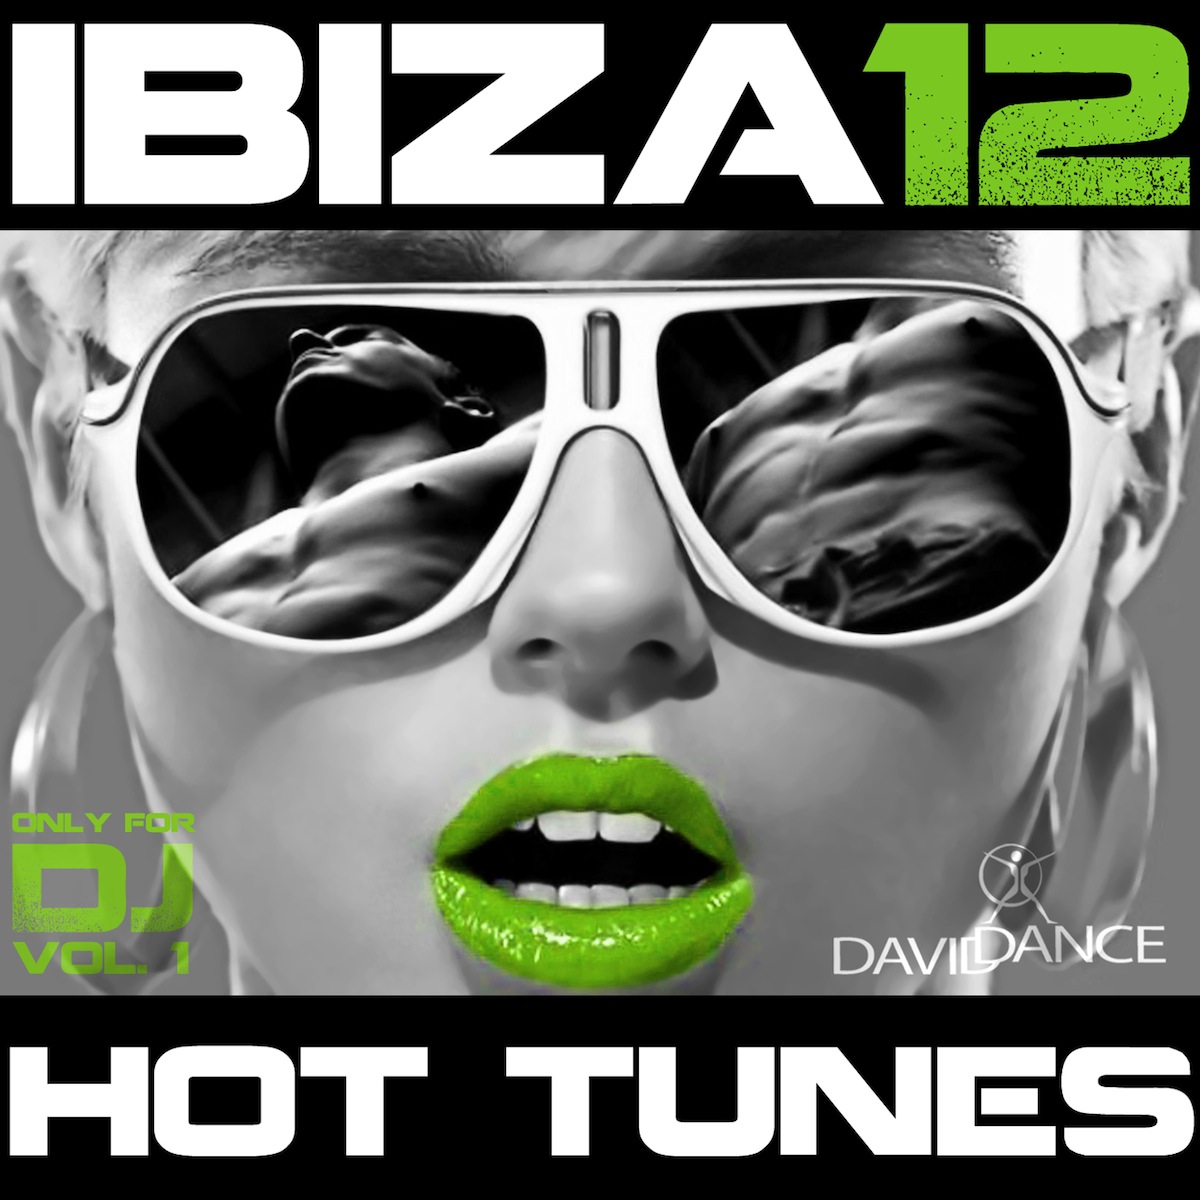 Gold - Ibiza 2012 Hot Tunes, Only for DJ, Vol. 1